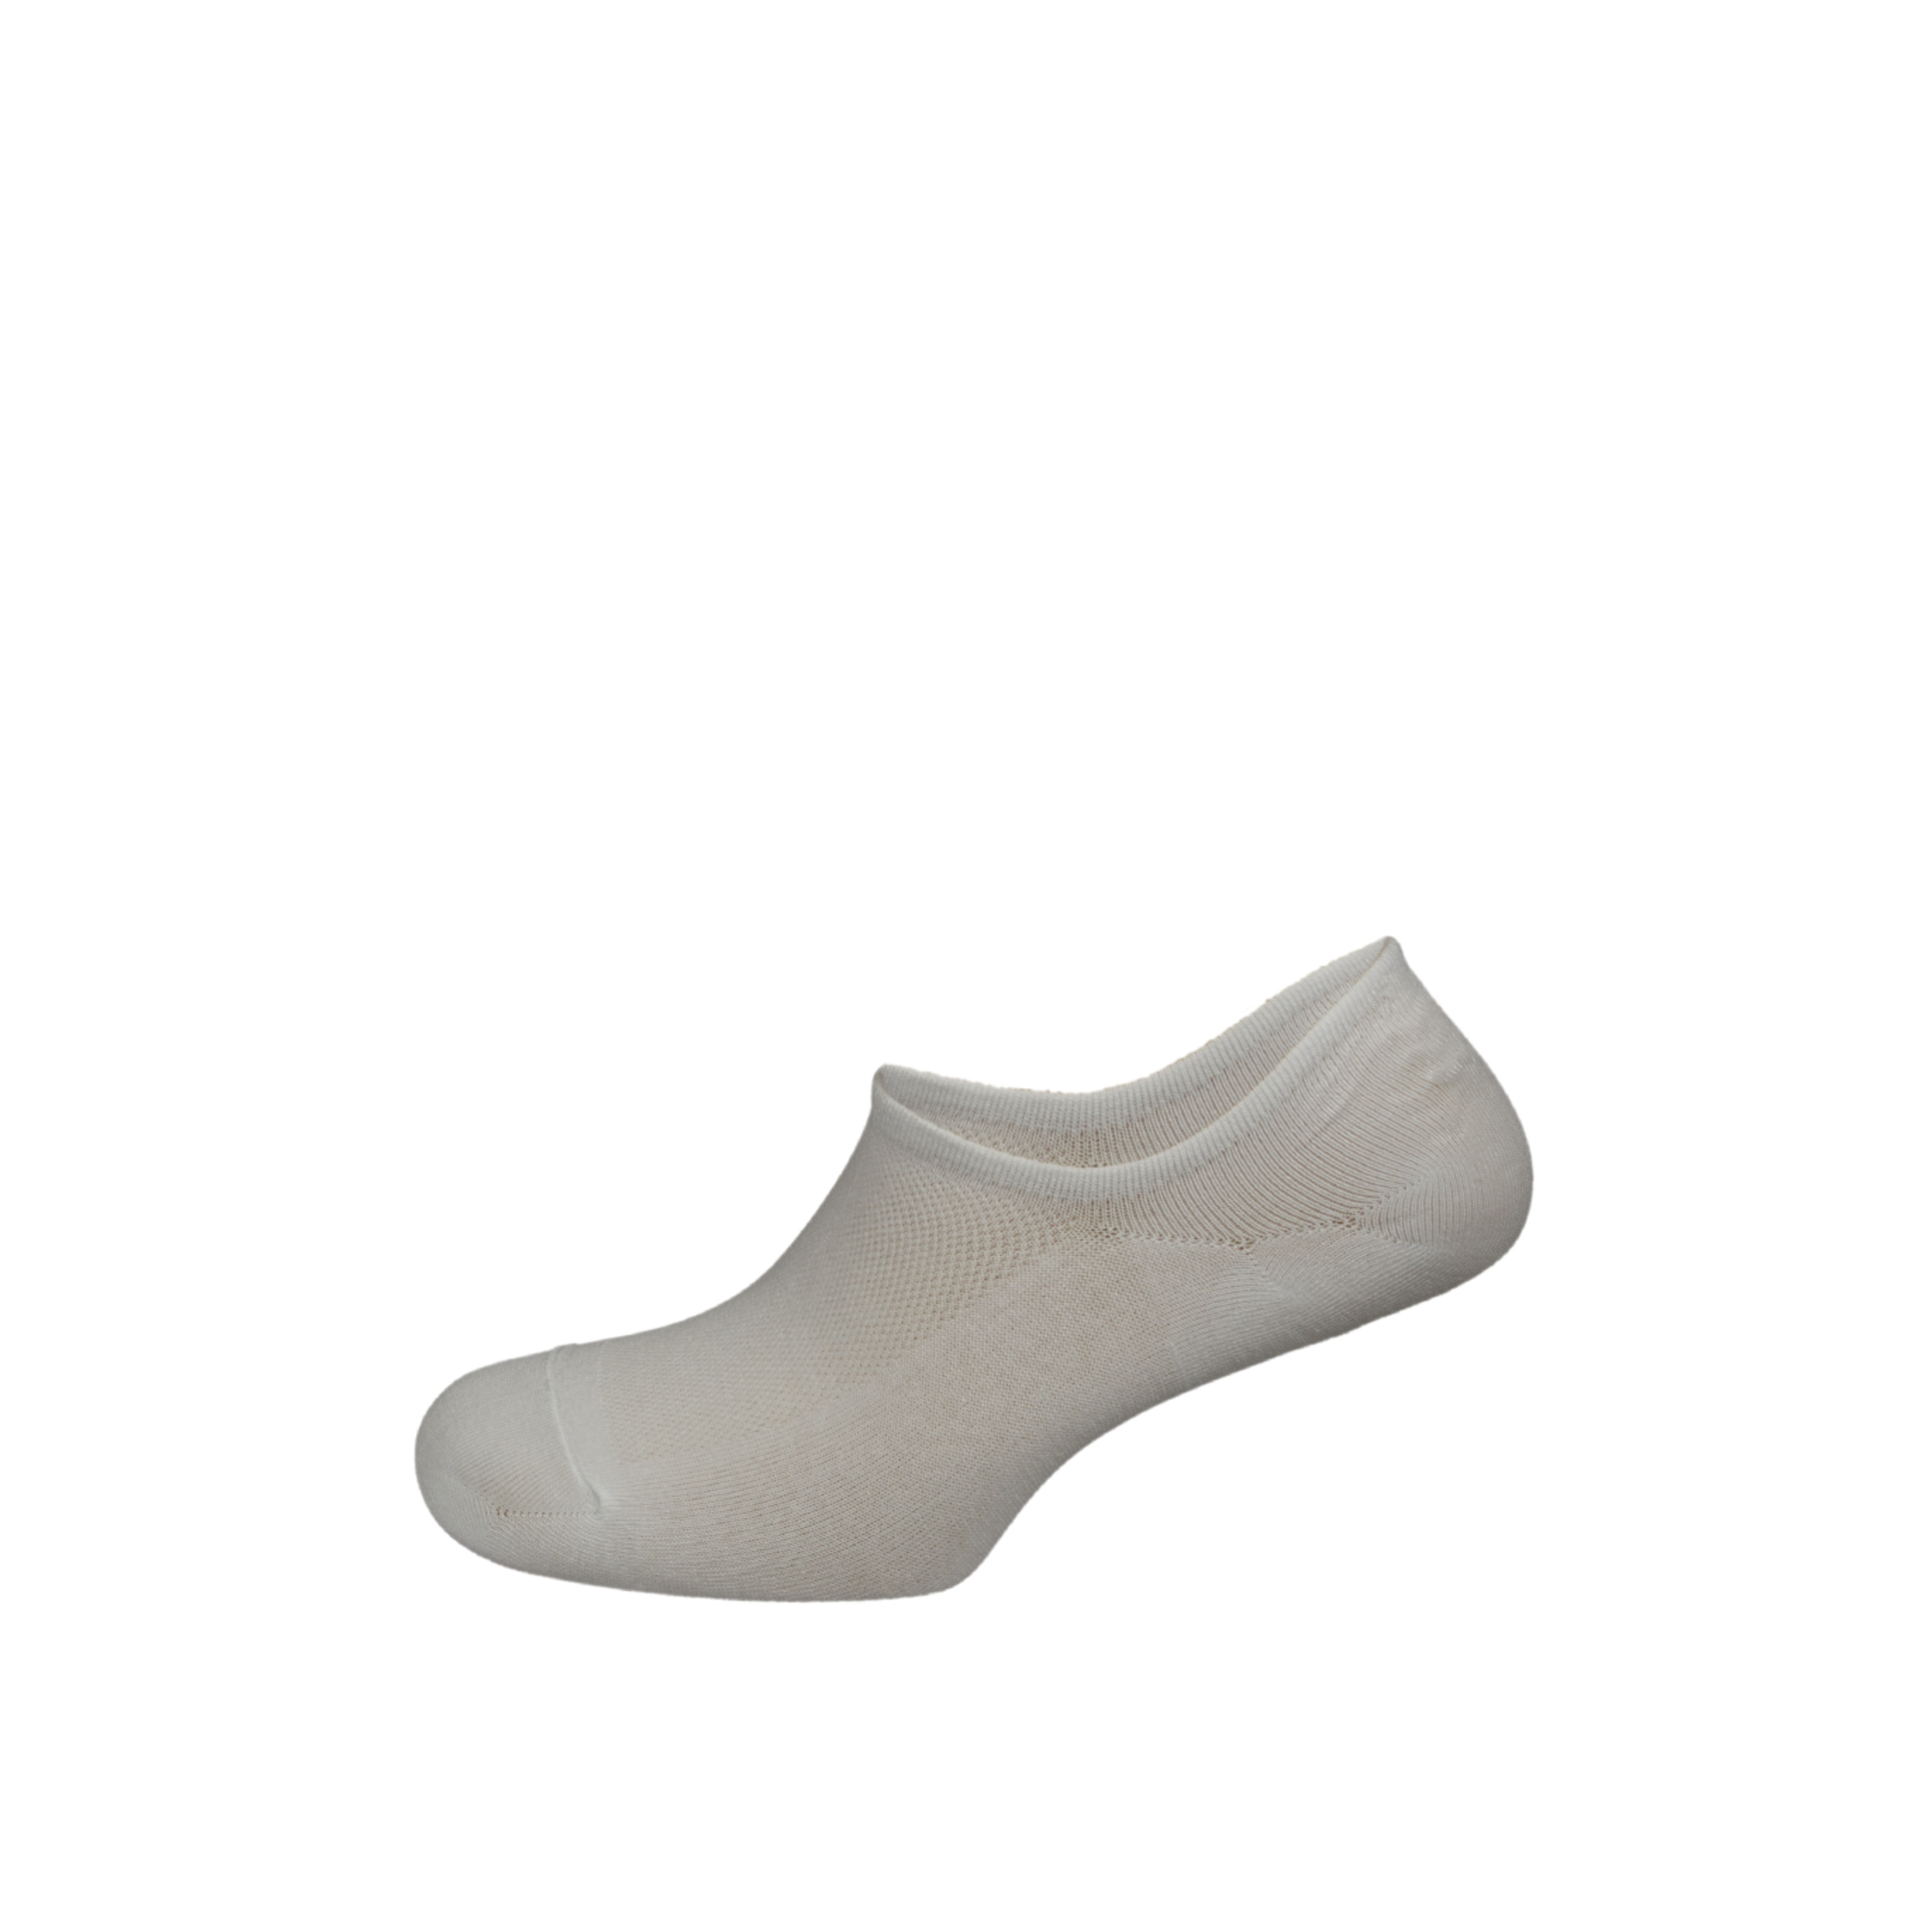 Pack 2 Pares De Calcetines Pinkie Bamboo - blanco - Calcetines Pinkie Con Fibra Natural  MKP